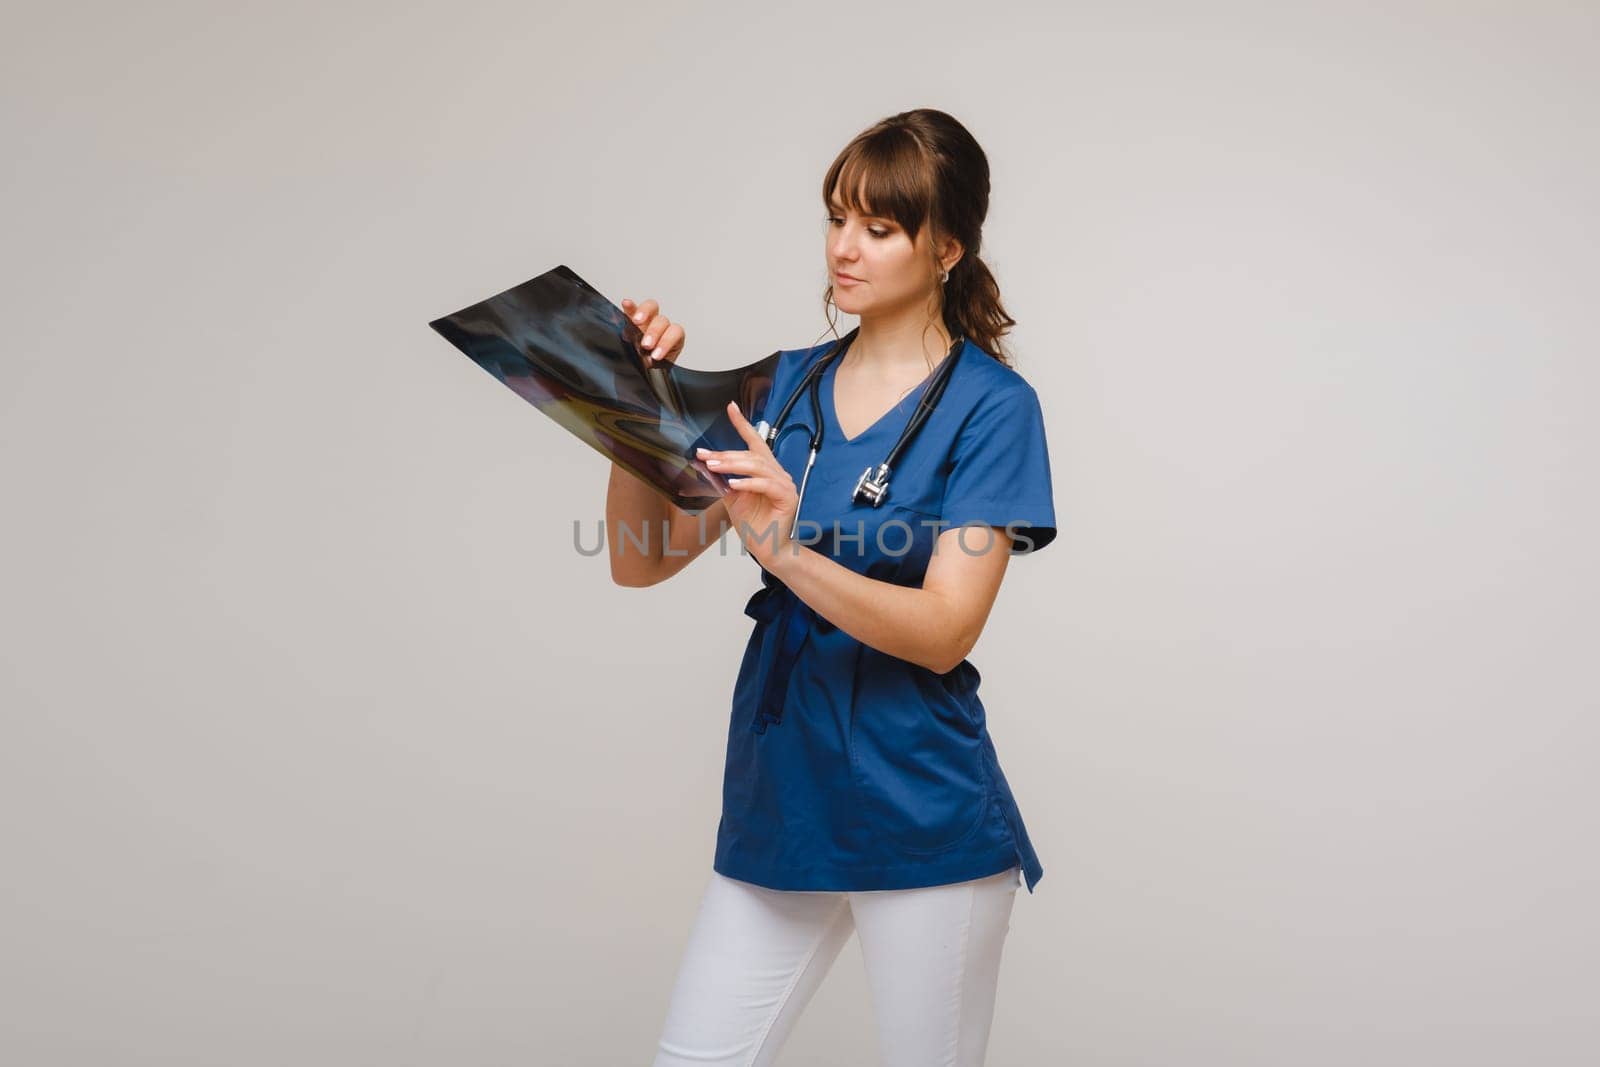 Female Brunette Doctor Looking at Tomography X-ray Film.